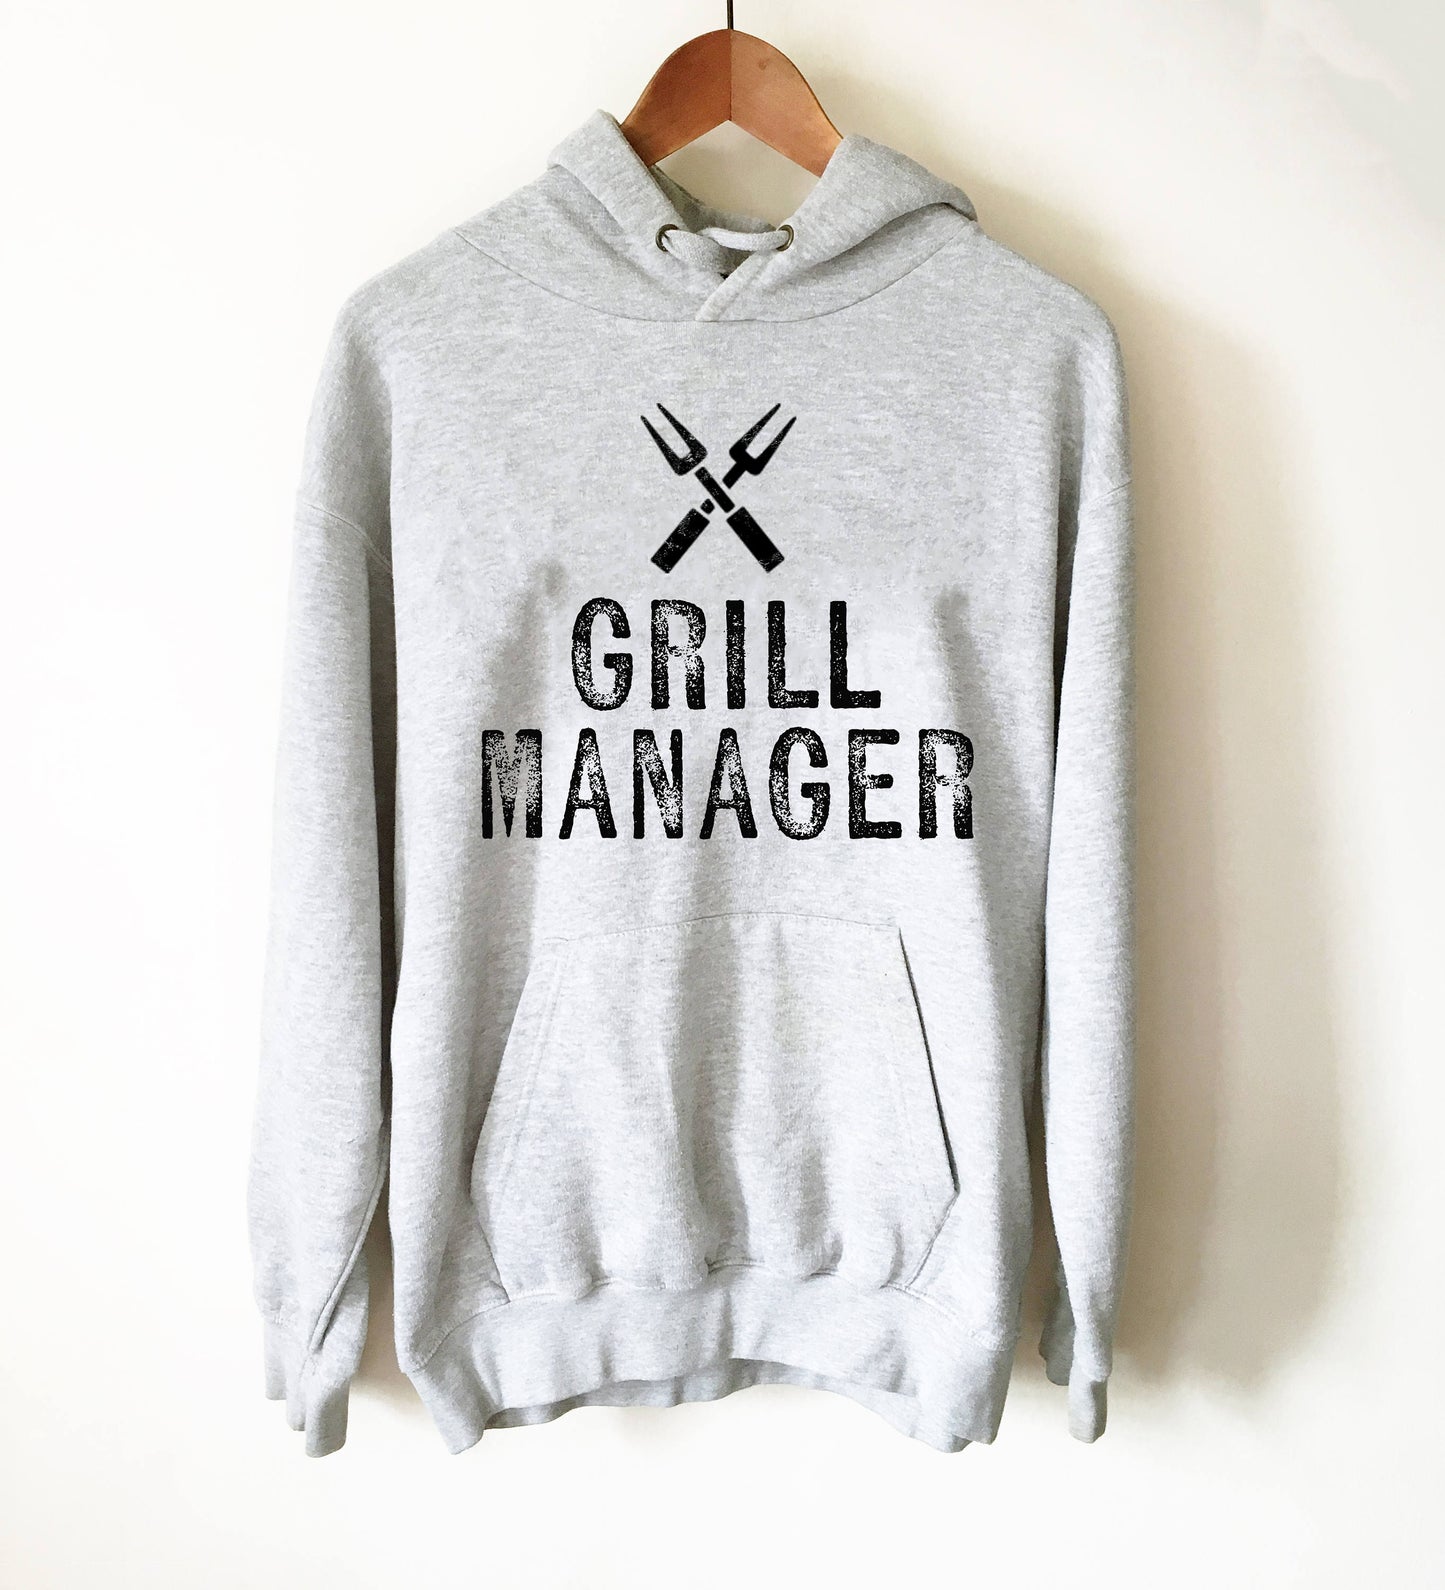 Grill Manager Hoodie - Bbq shirt, Grilling shirt, Grill master, Summer cookout, Camping Shirt, Chef shirt, Chef gift, Food shirt